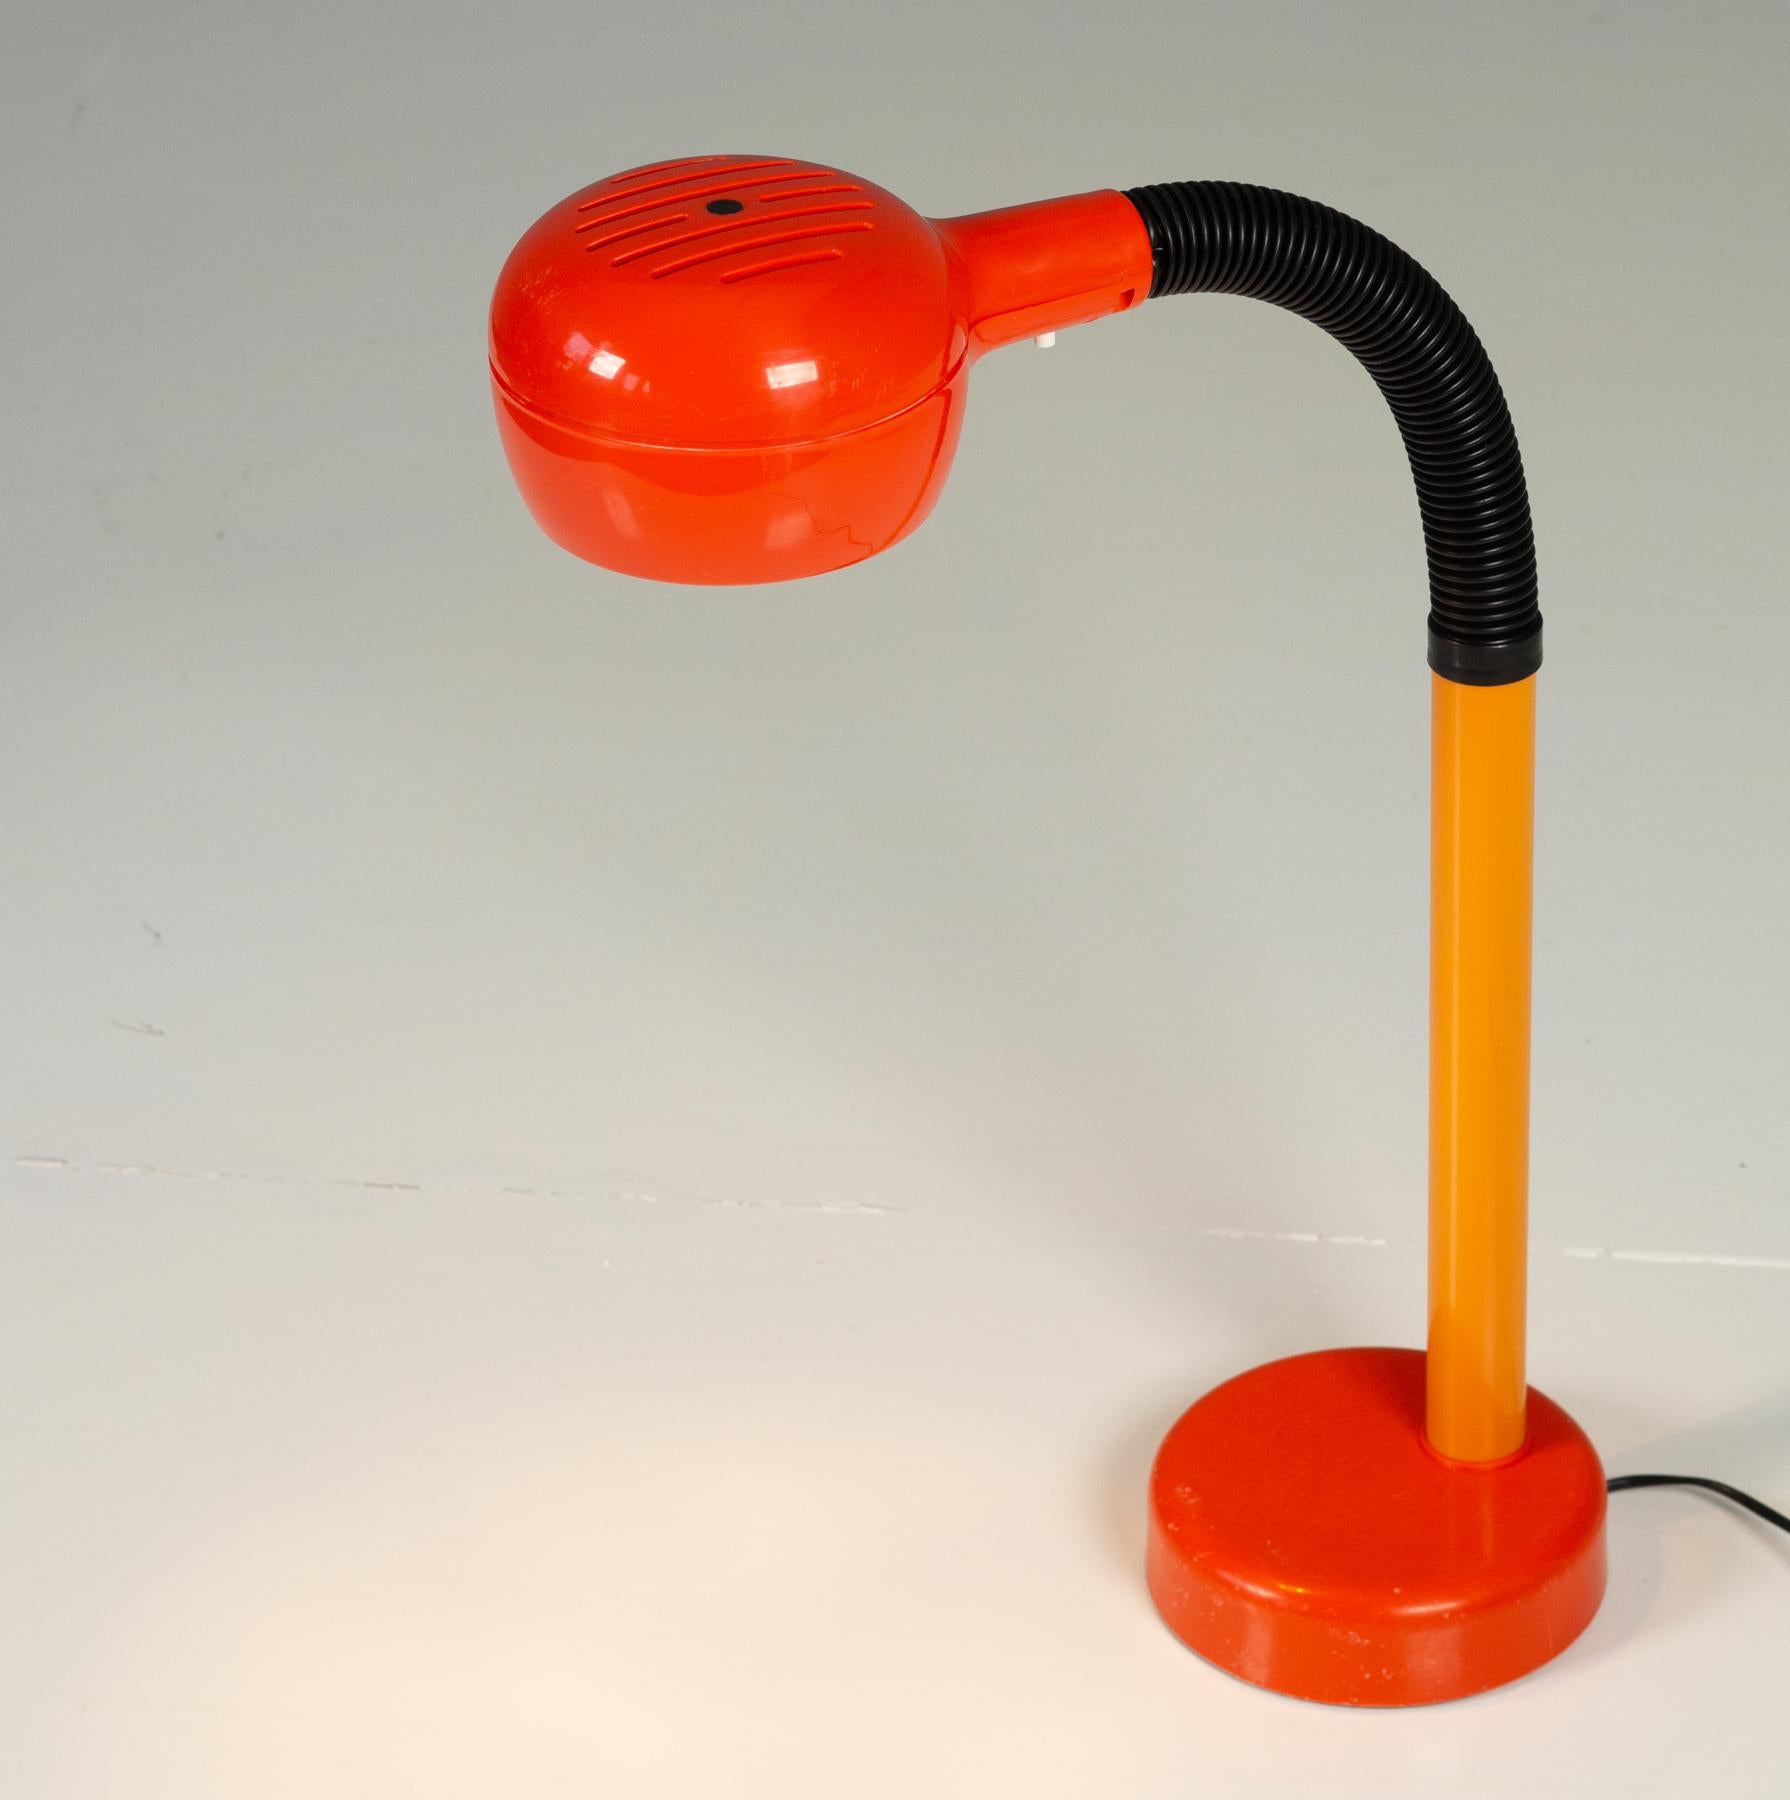 Fagerhults Cobra desk lamp 1975.

Rounded and balanced, with a funky vintage orange. The goose neck can be placed in any desired position. This design won the prestigious IF design award in 1975. The foot of the lamp has some wear, which is quite